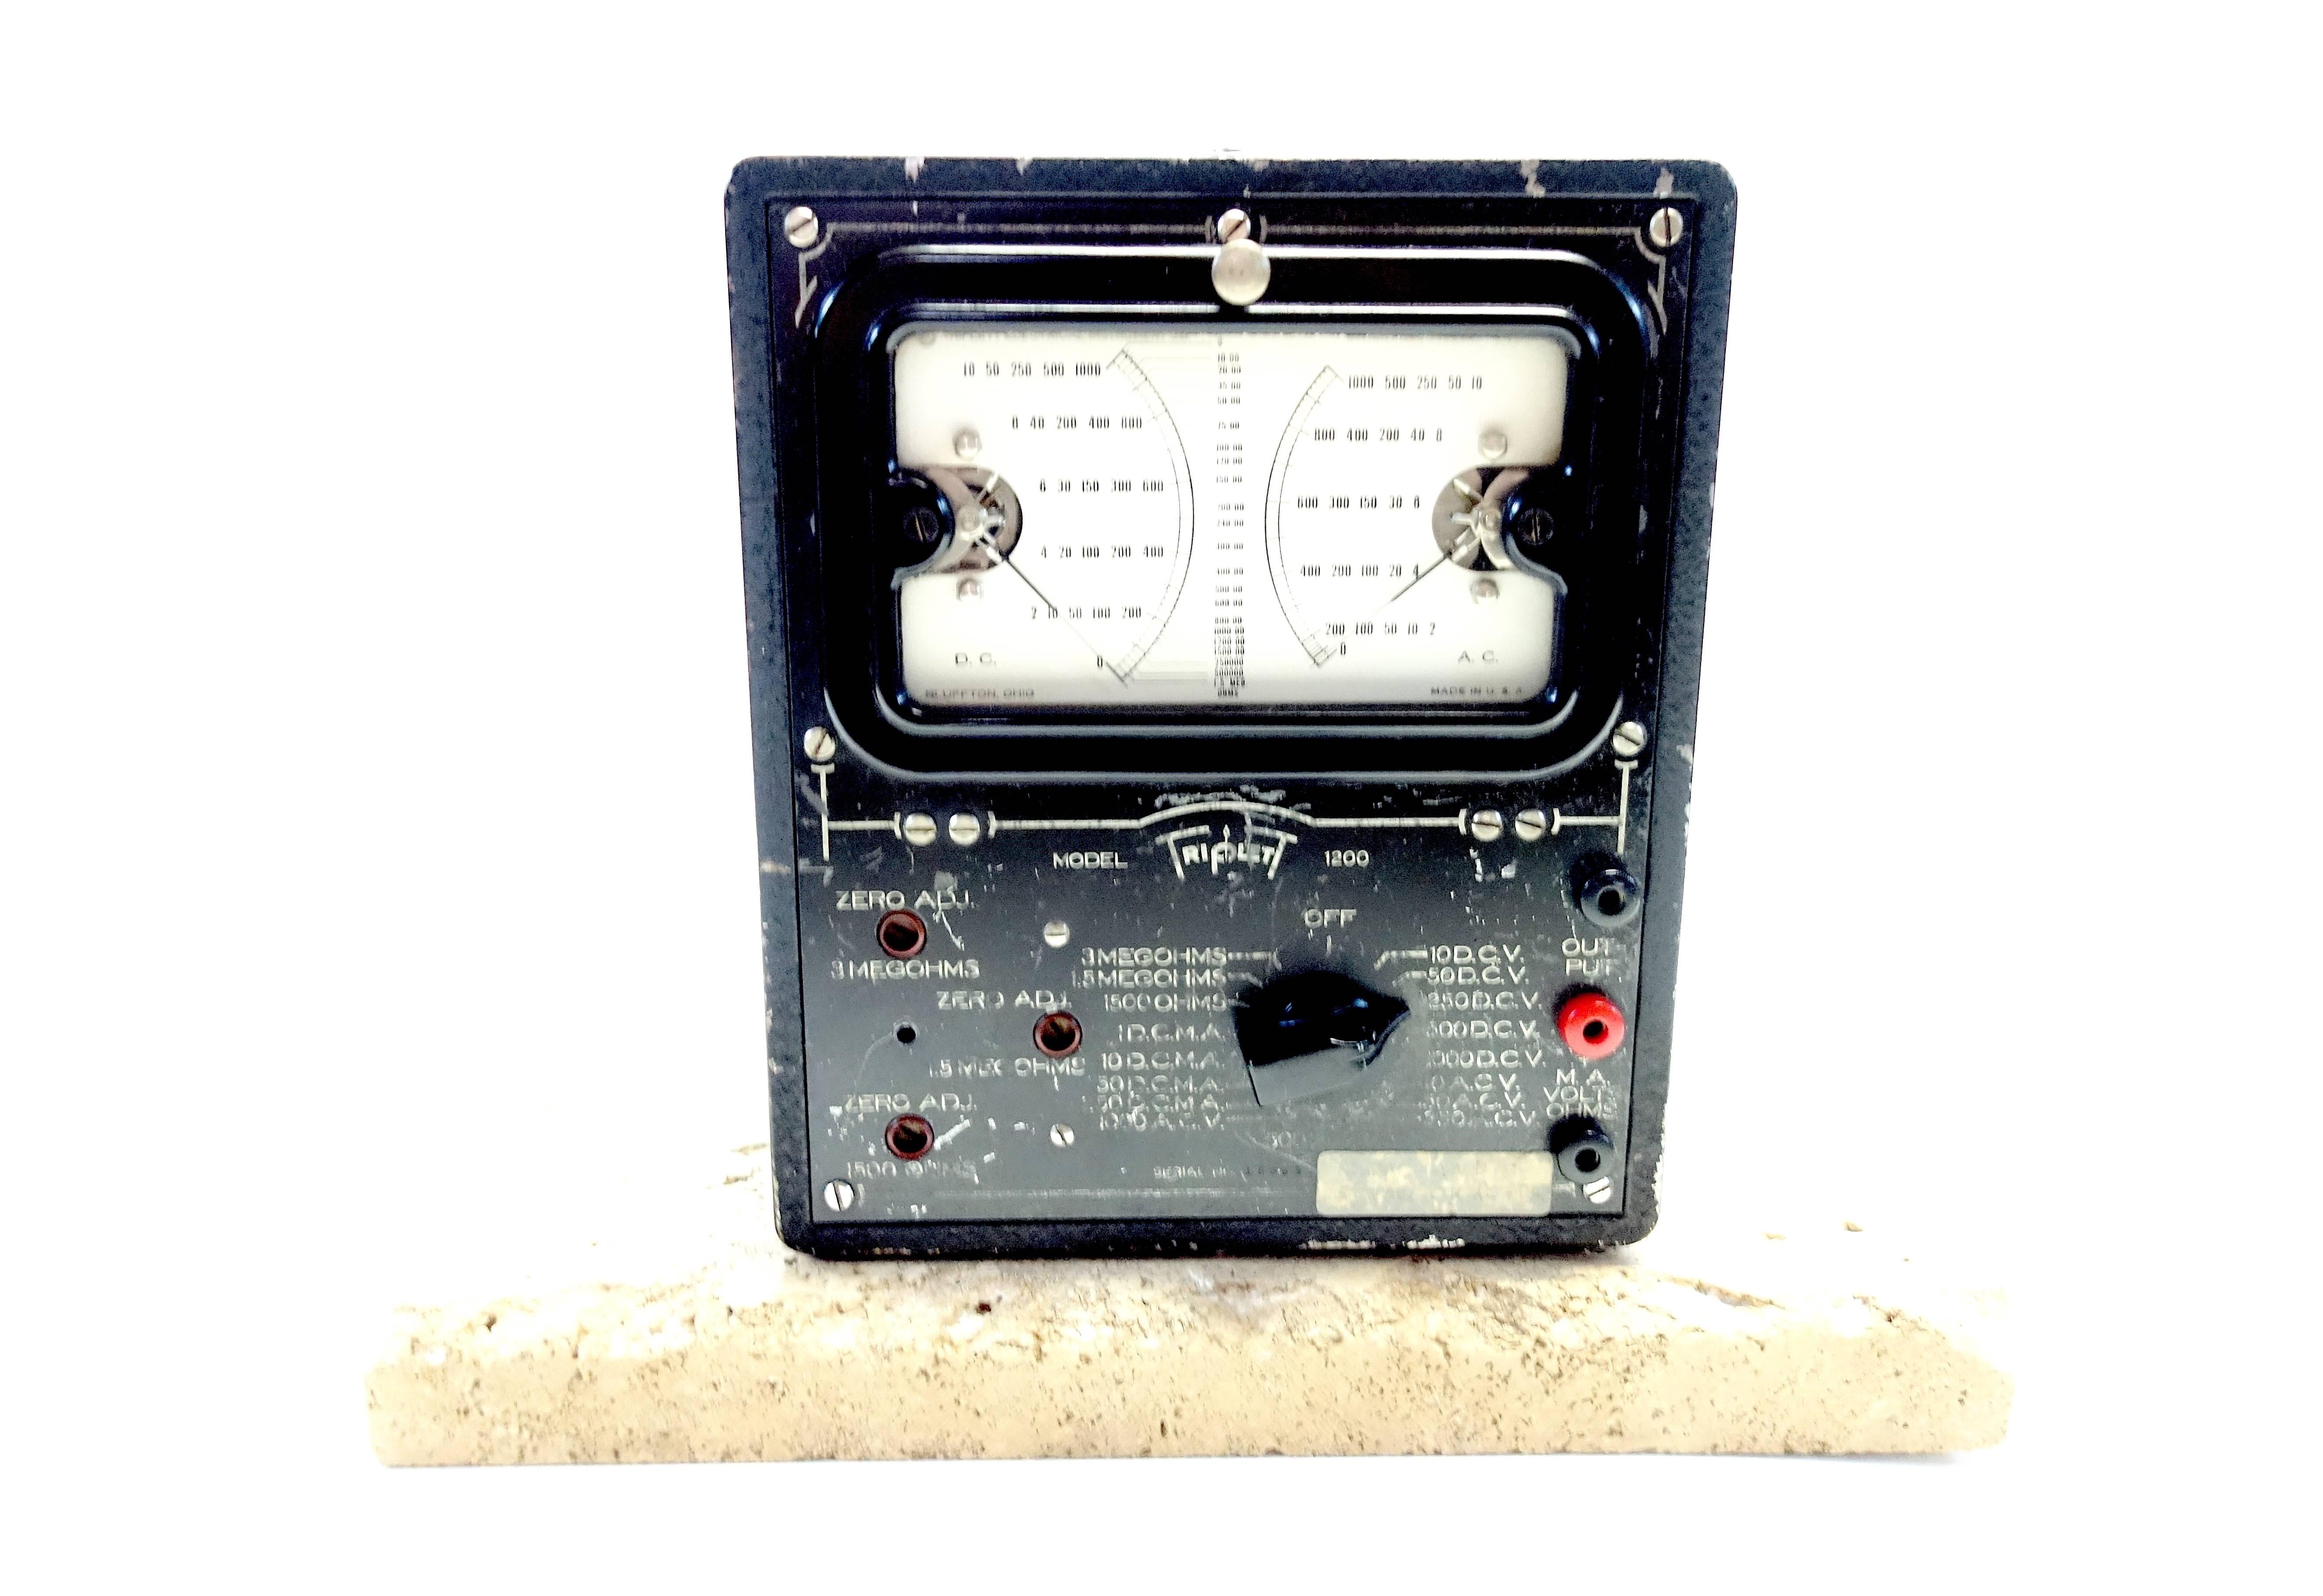 Submitted for your consideration is this, circa 1934, Triplett Universal Electrical Meter. Your choice of buying it mounted on a stone slab as shown or unmounted.
Beautiful desk or shelf sculpture or accessory. Front meter panel tilts out for other